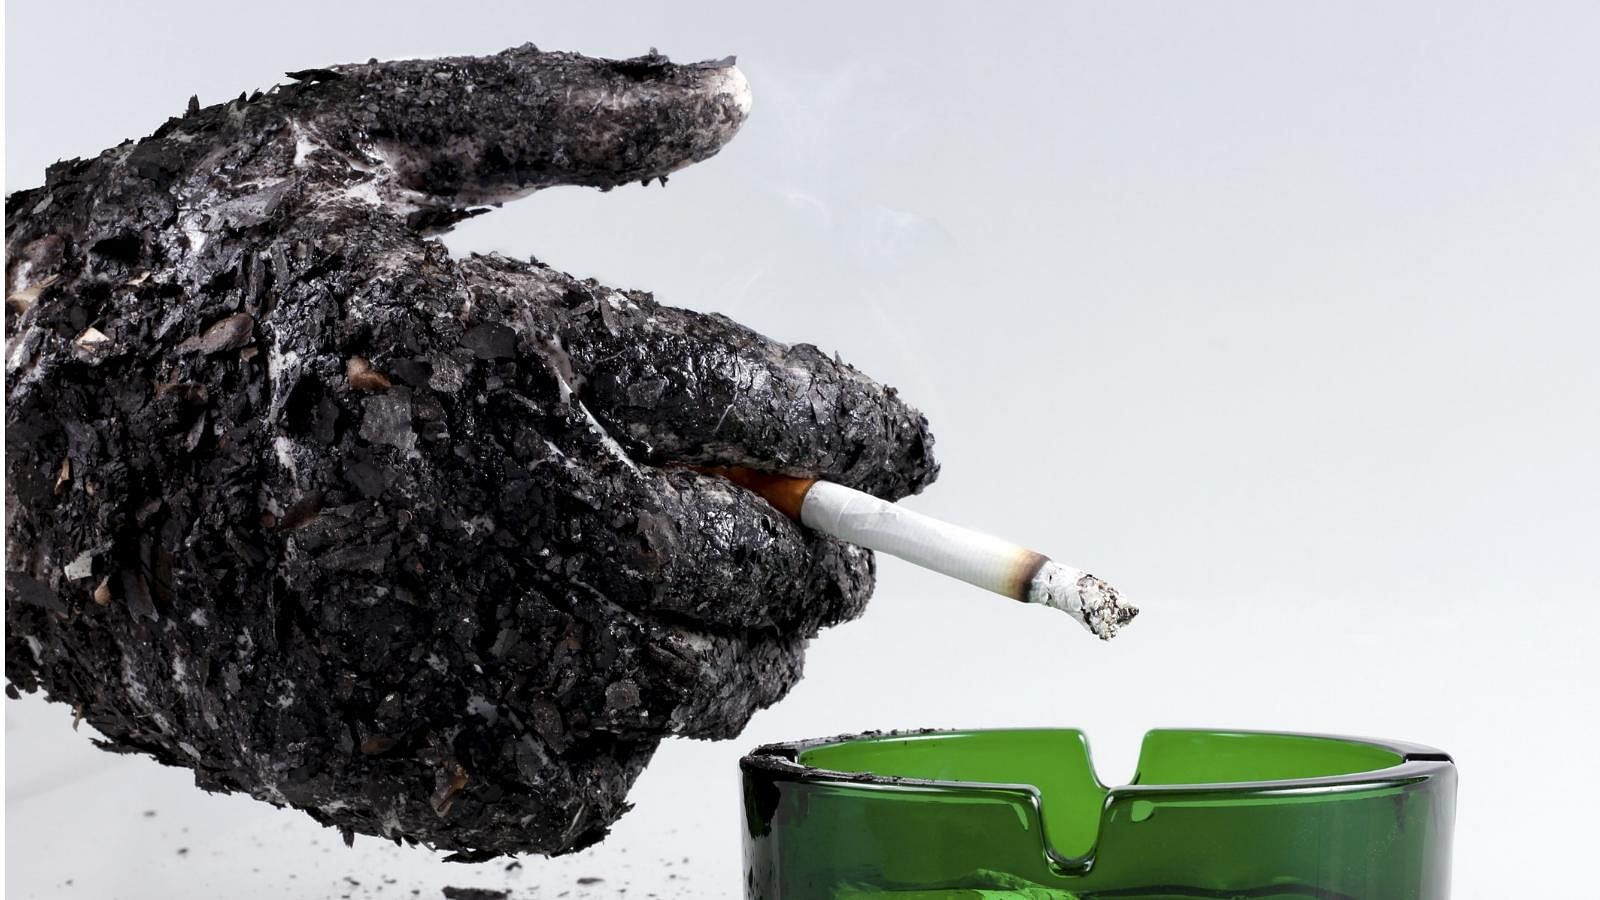 Let’s wage a war against Tobacco (Photo: iStock)